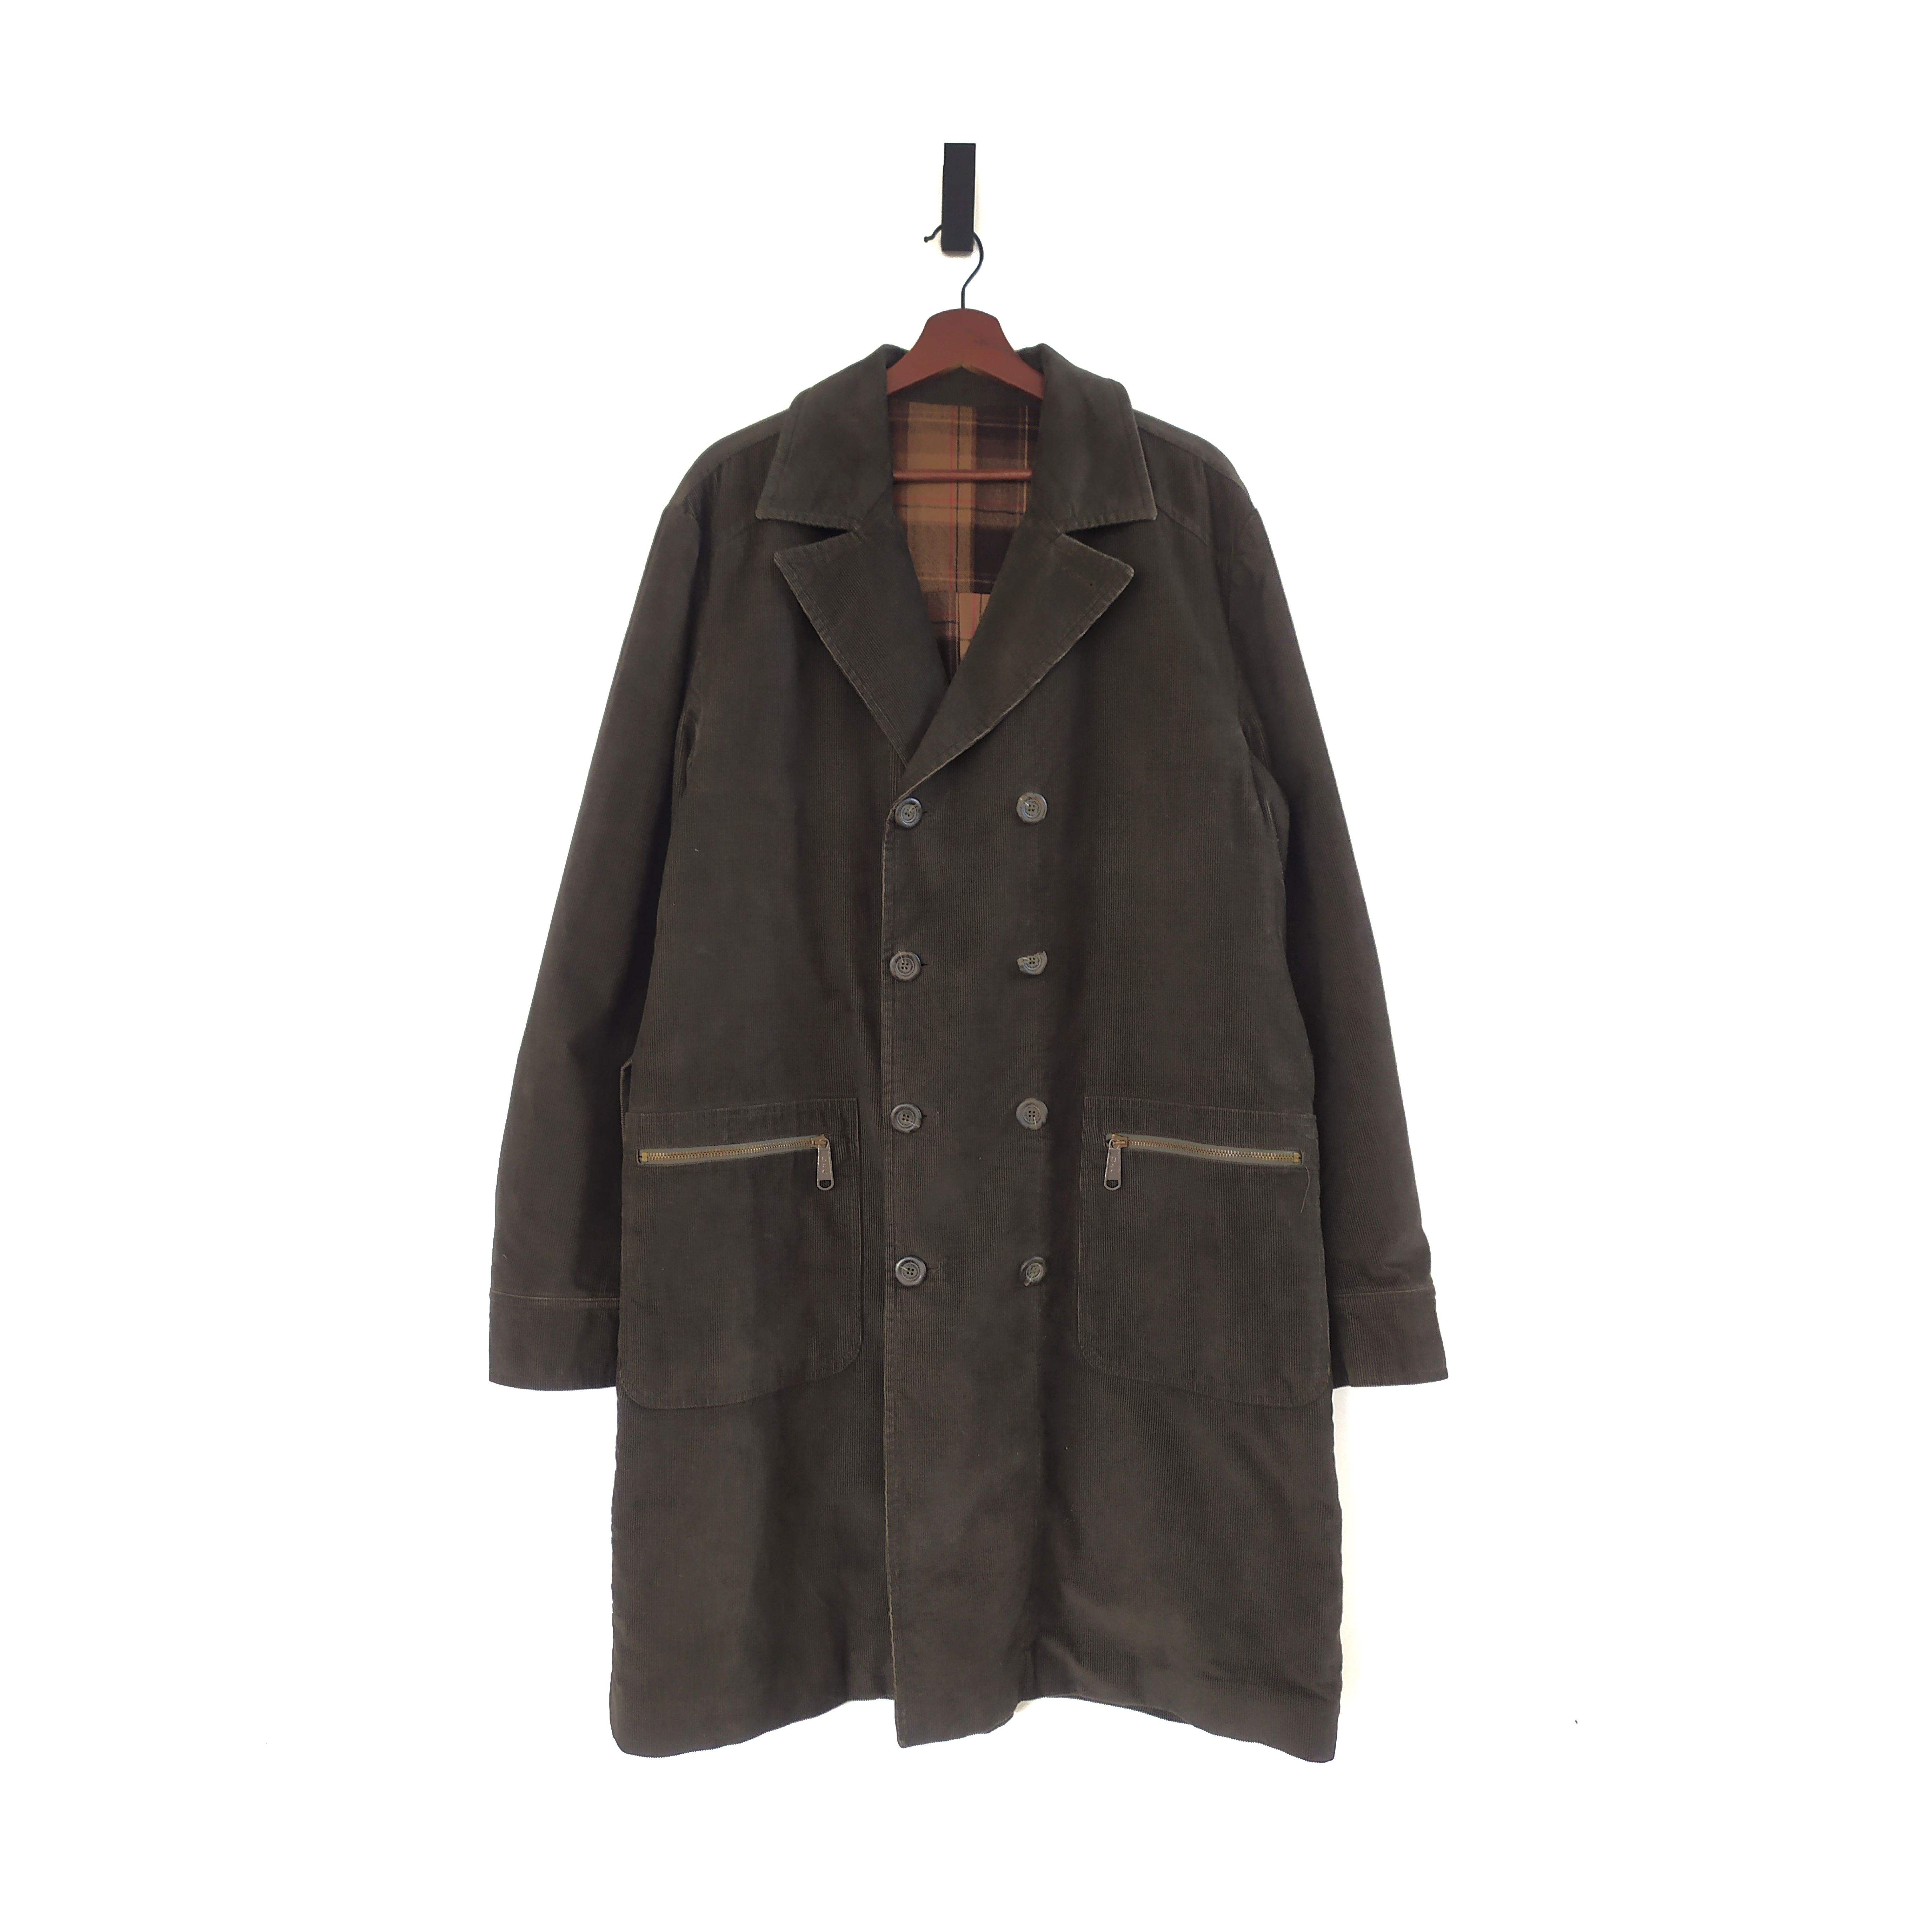 Dolce & Gabbana Corduroy Long Jacket Made in Italy - 1